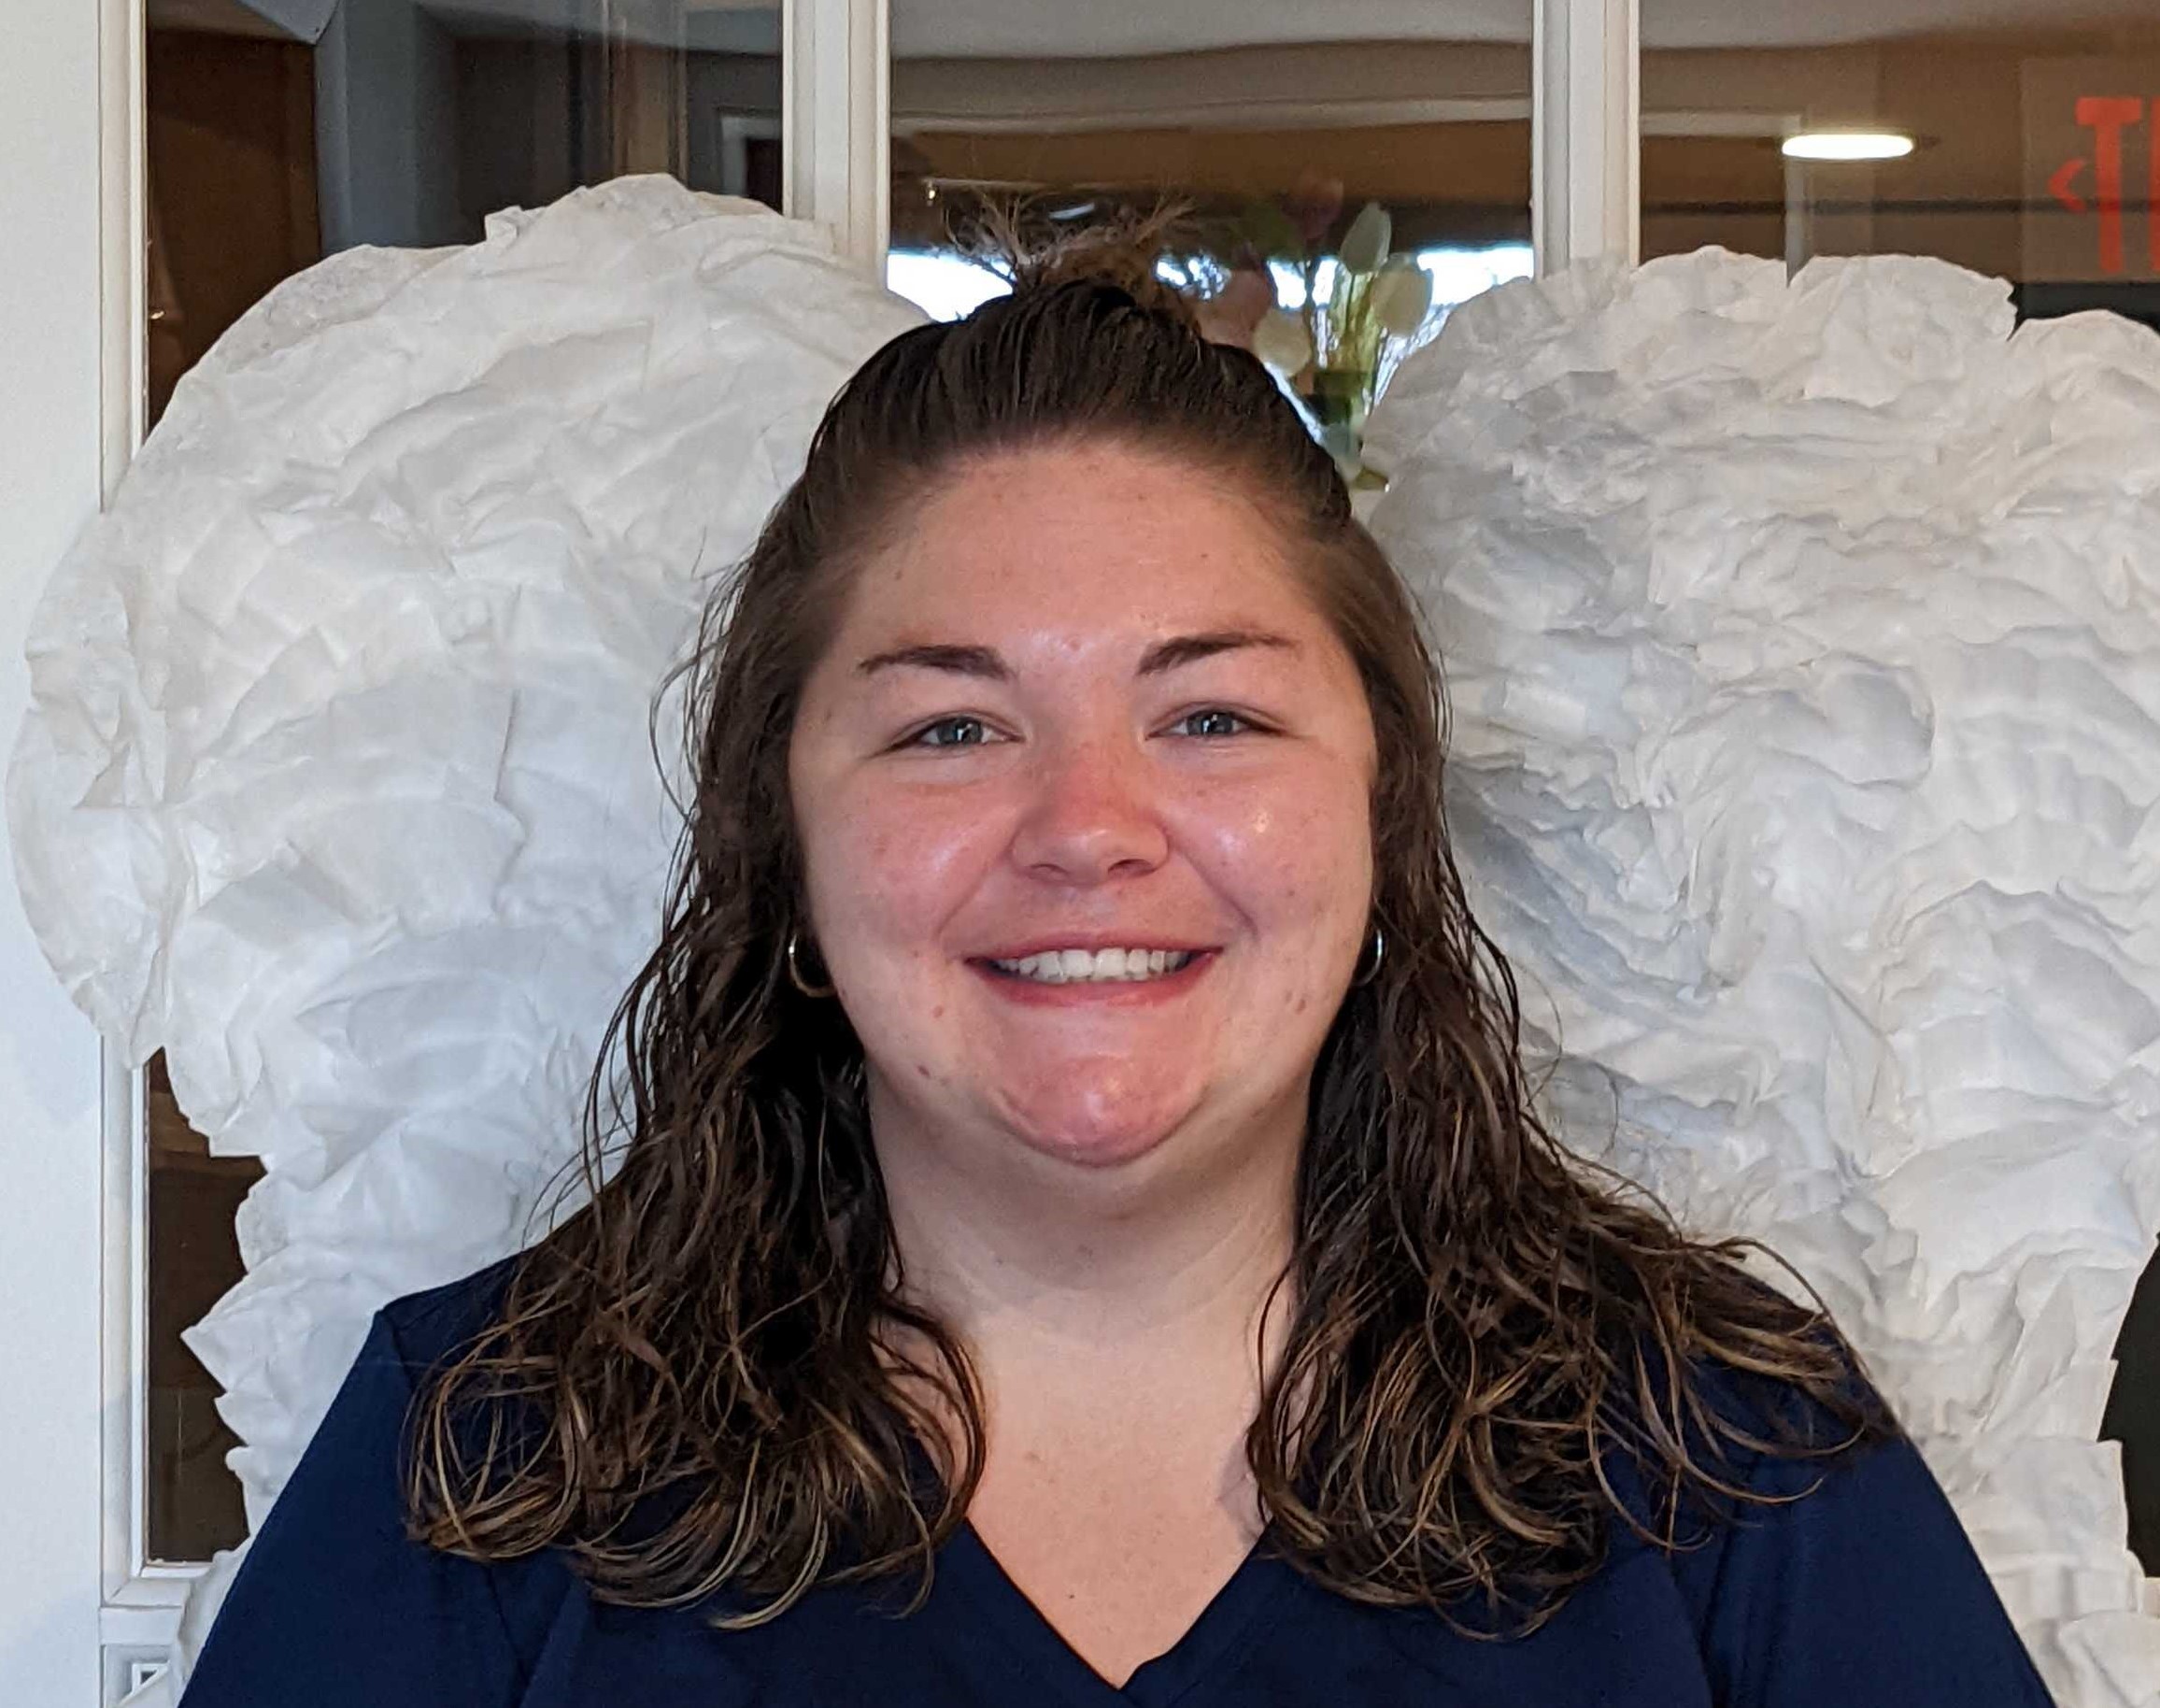 Keana standing in front of white angel wings